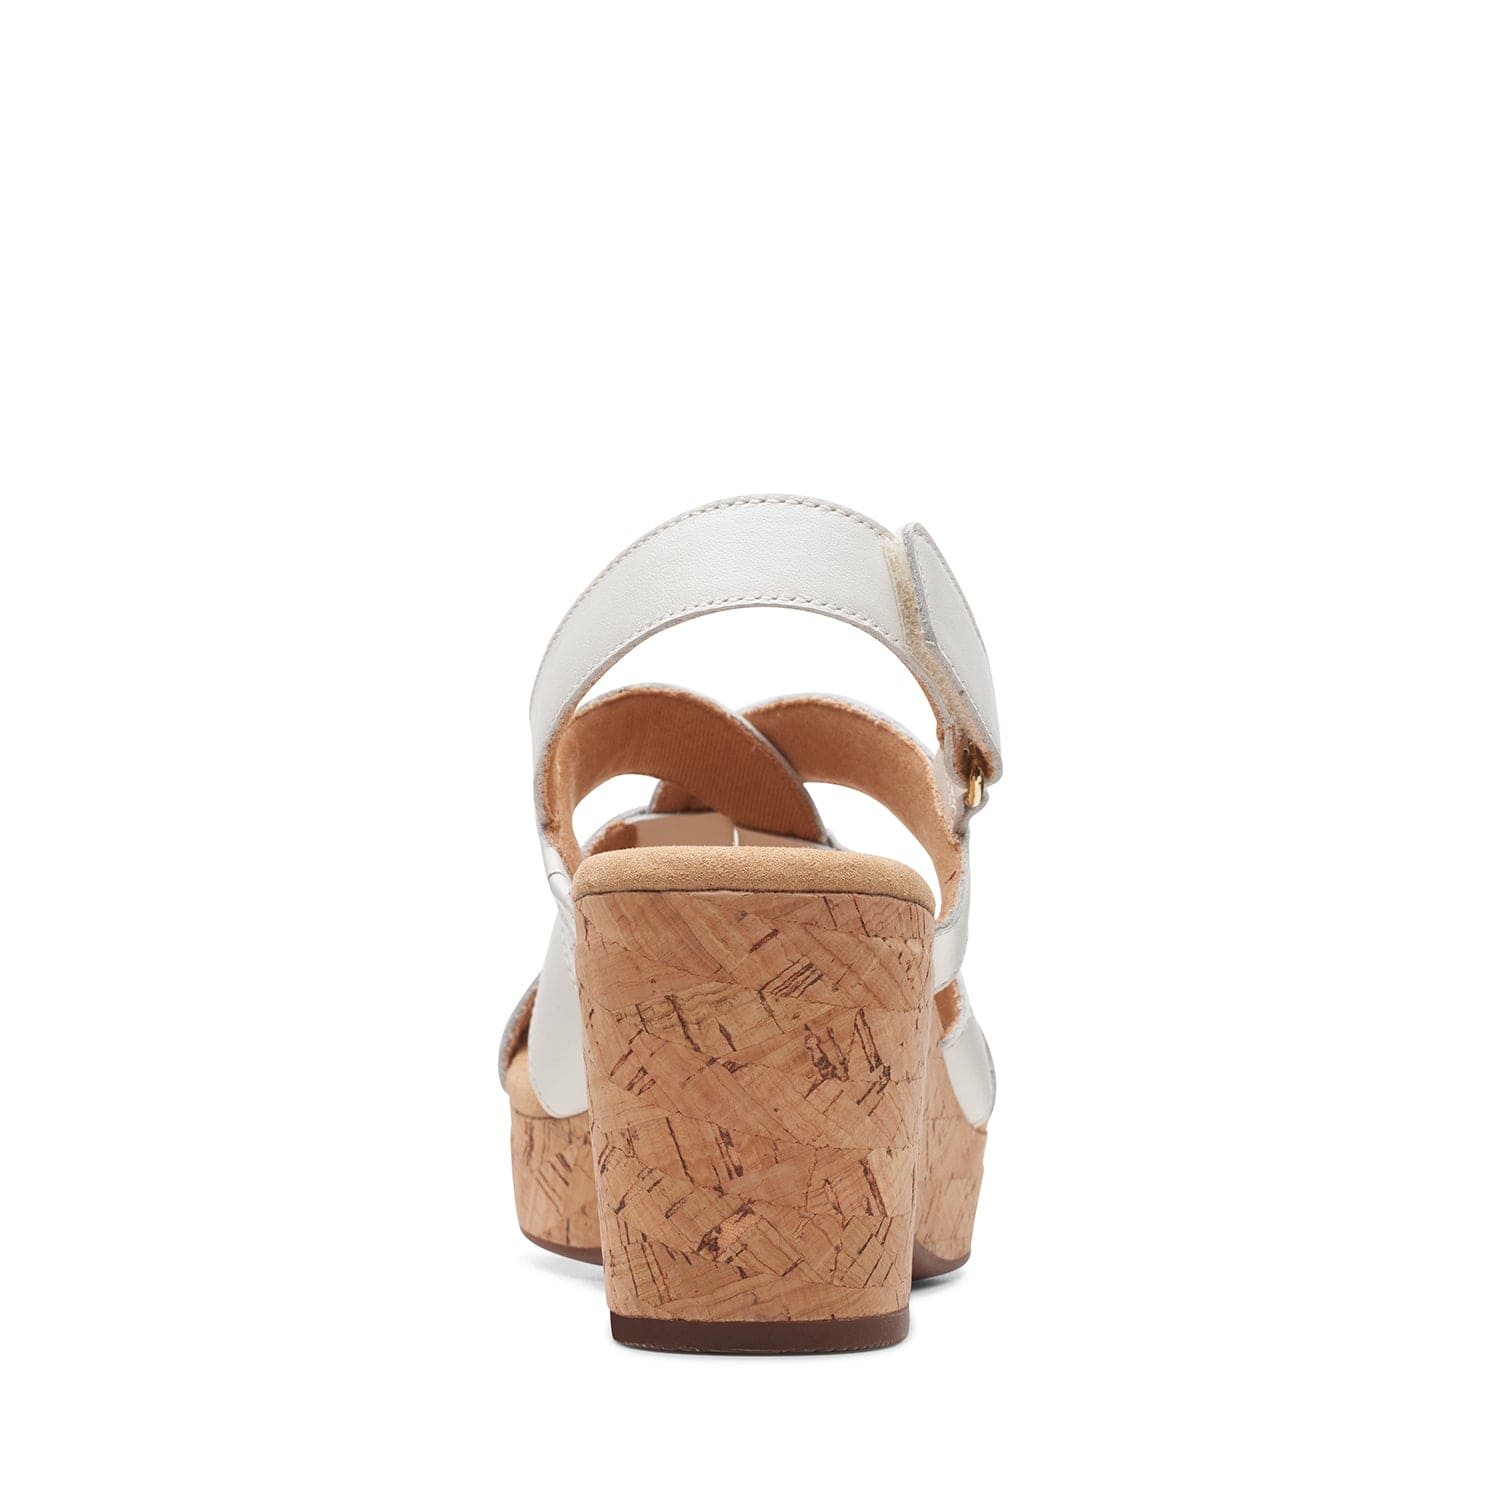 Clarks Giselle Beach Sandals - White Leather - 261662324 - D Width (Standard Fit)